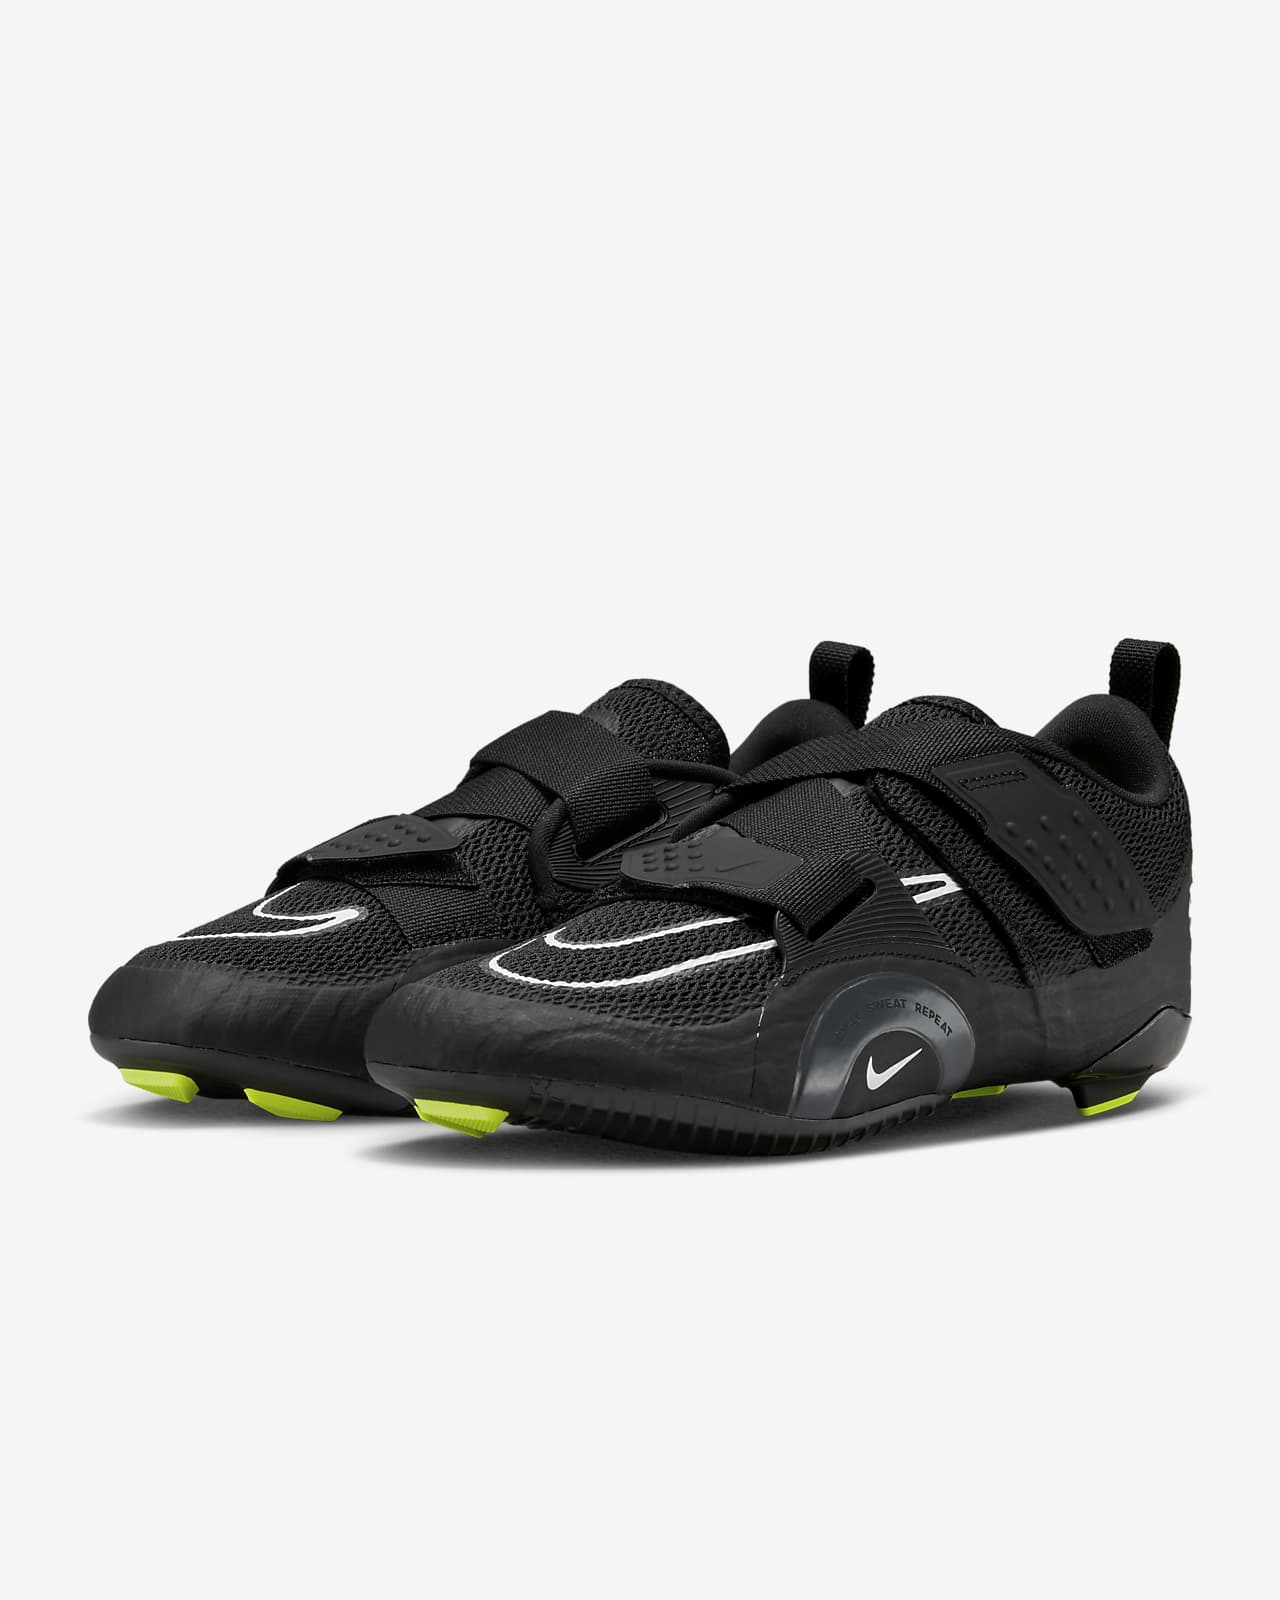 Nike SuperRep Cycle 2 Next Nature Indoor Cycling Shoes.